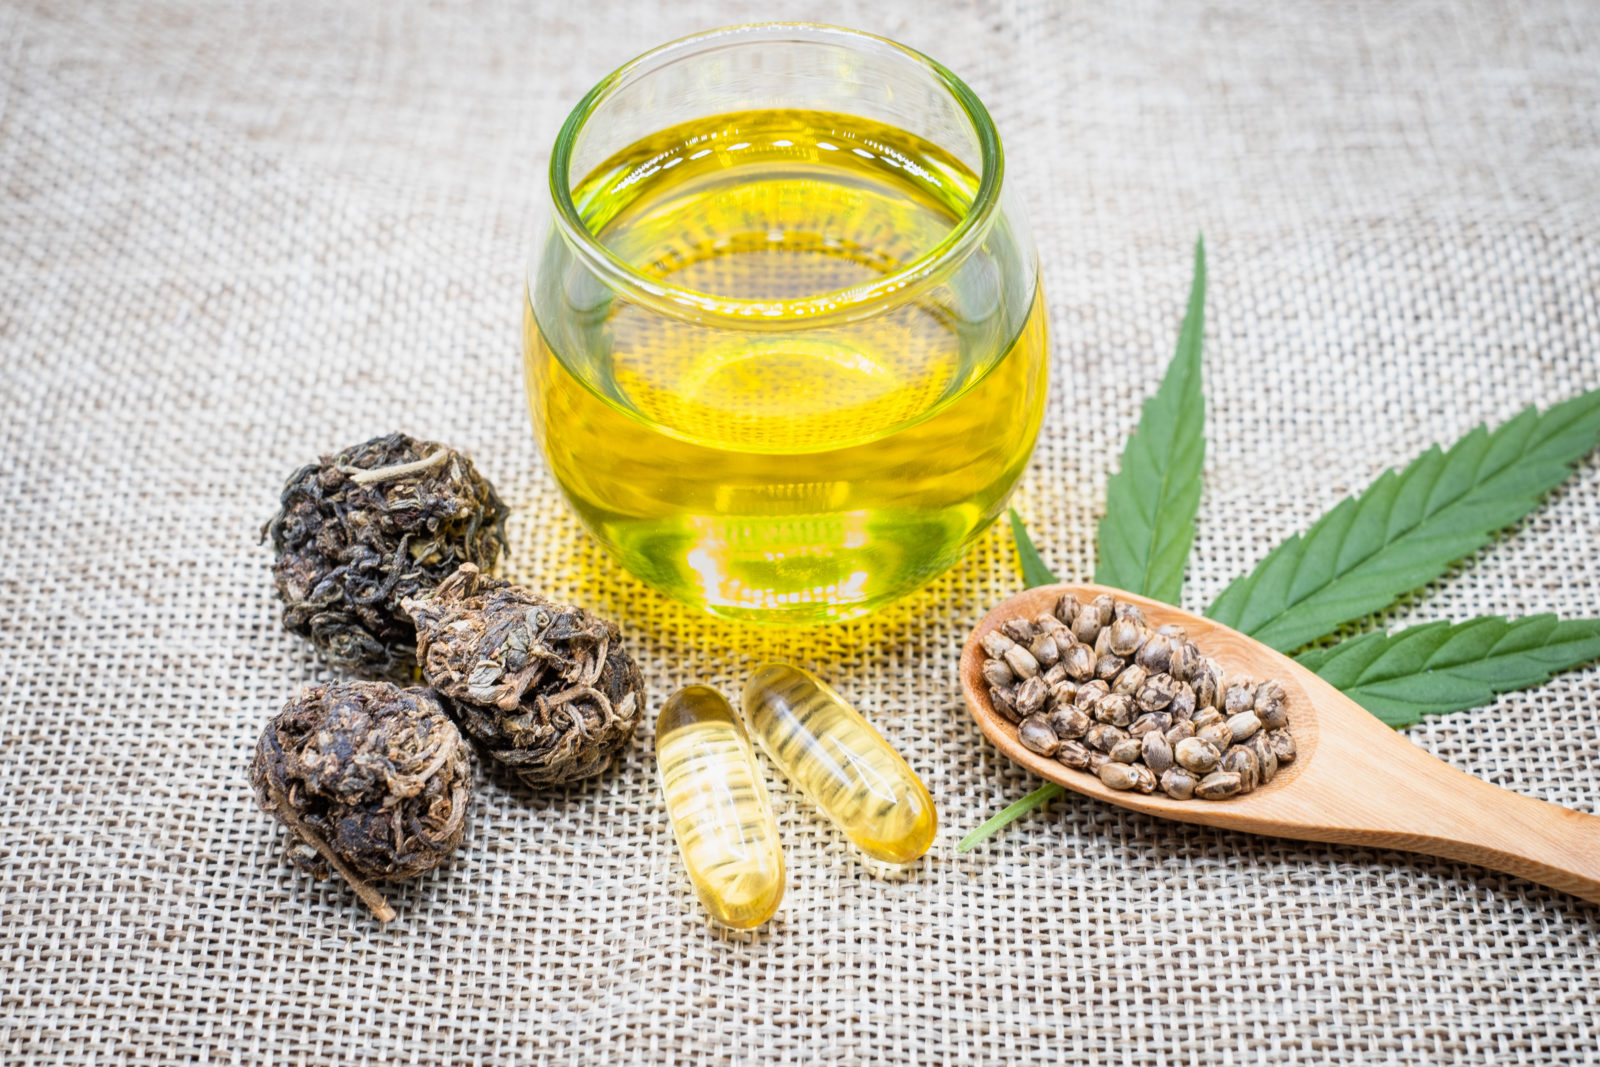 Difference between CBD Oil and Hemp Oil